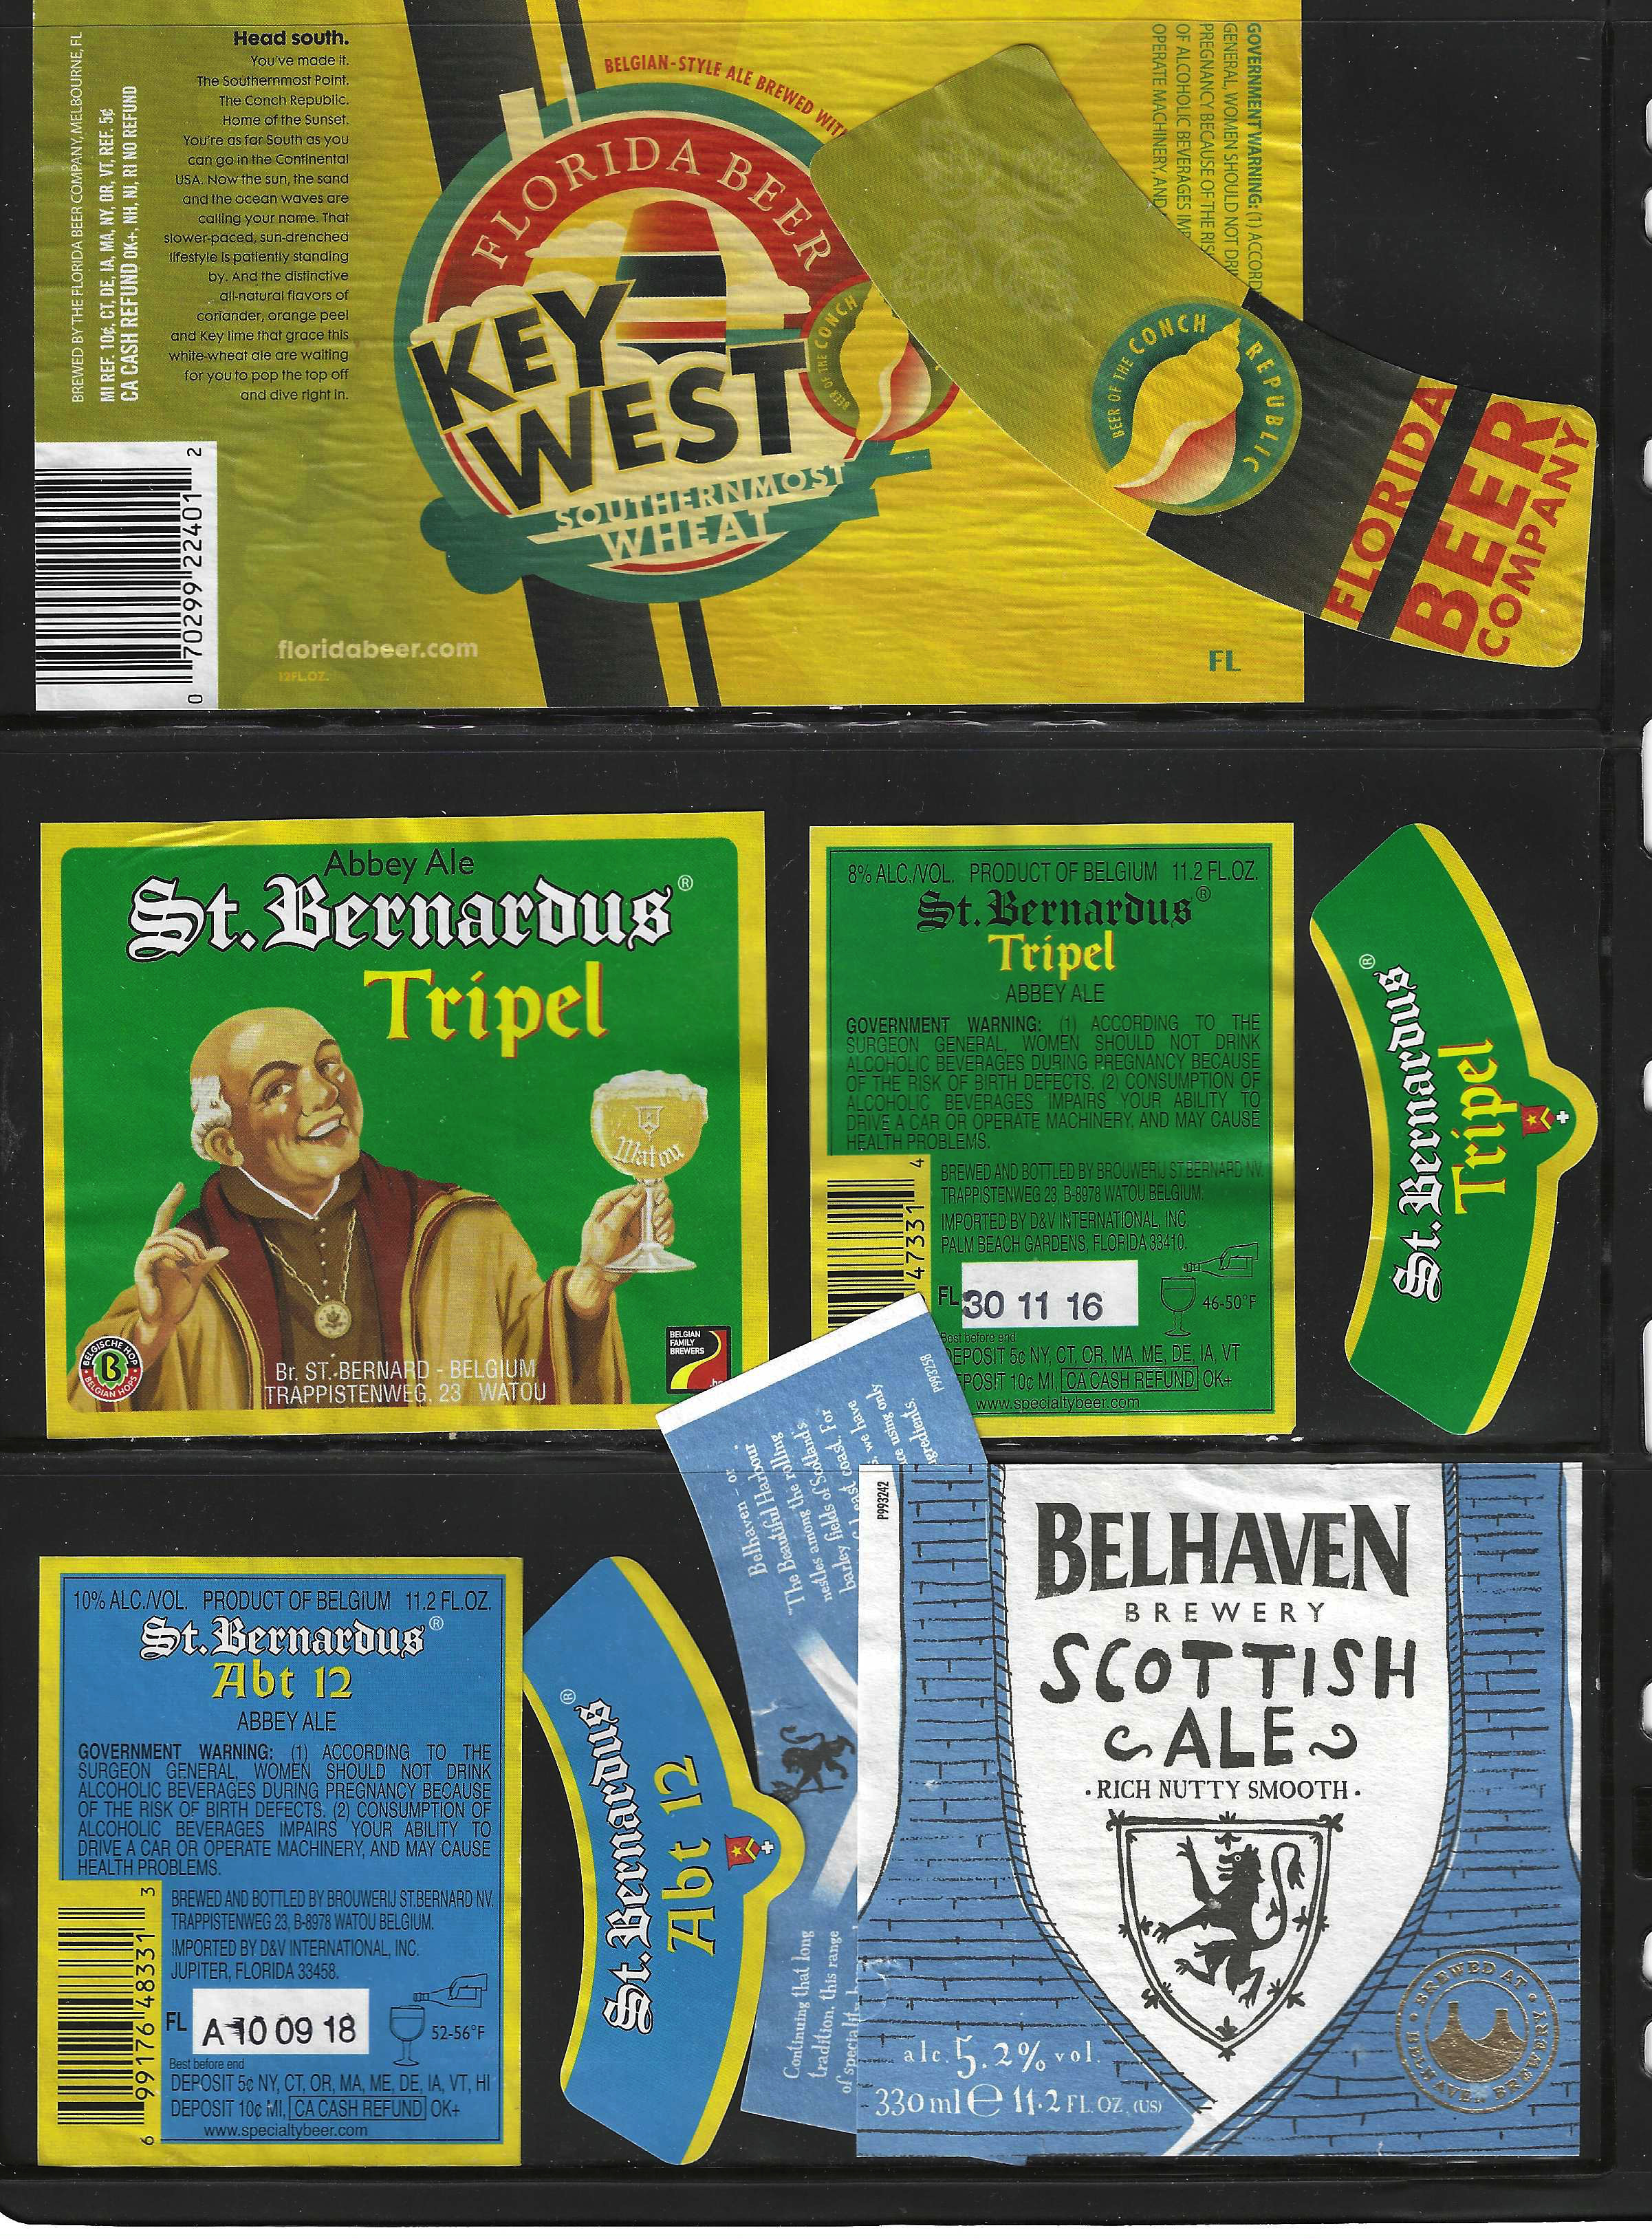 FL state related beer labels either w/ FLORIDA or FL printed upon them or an indication that a 5¢ state bottle deposit had been paid and was eligible for refund upon return